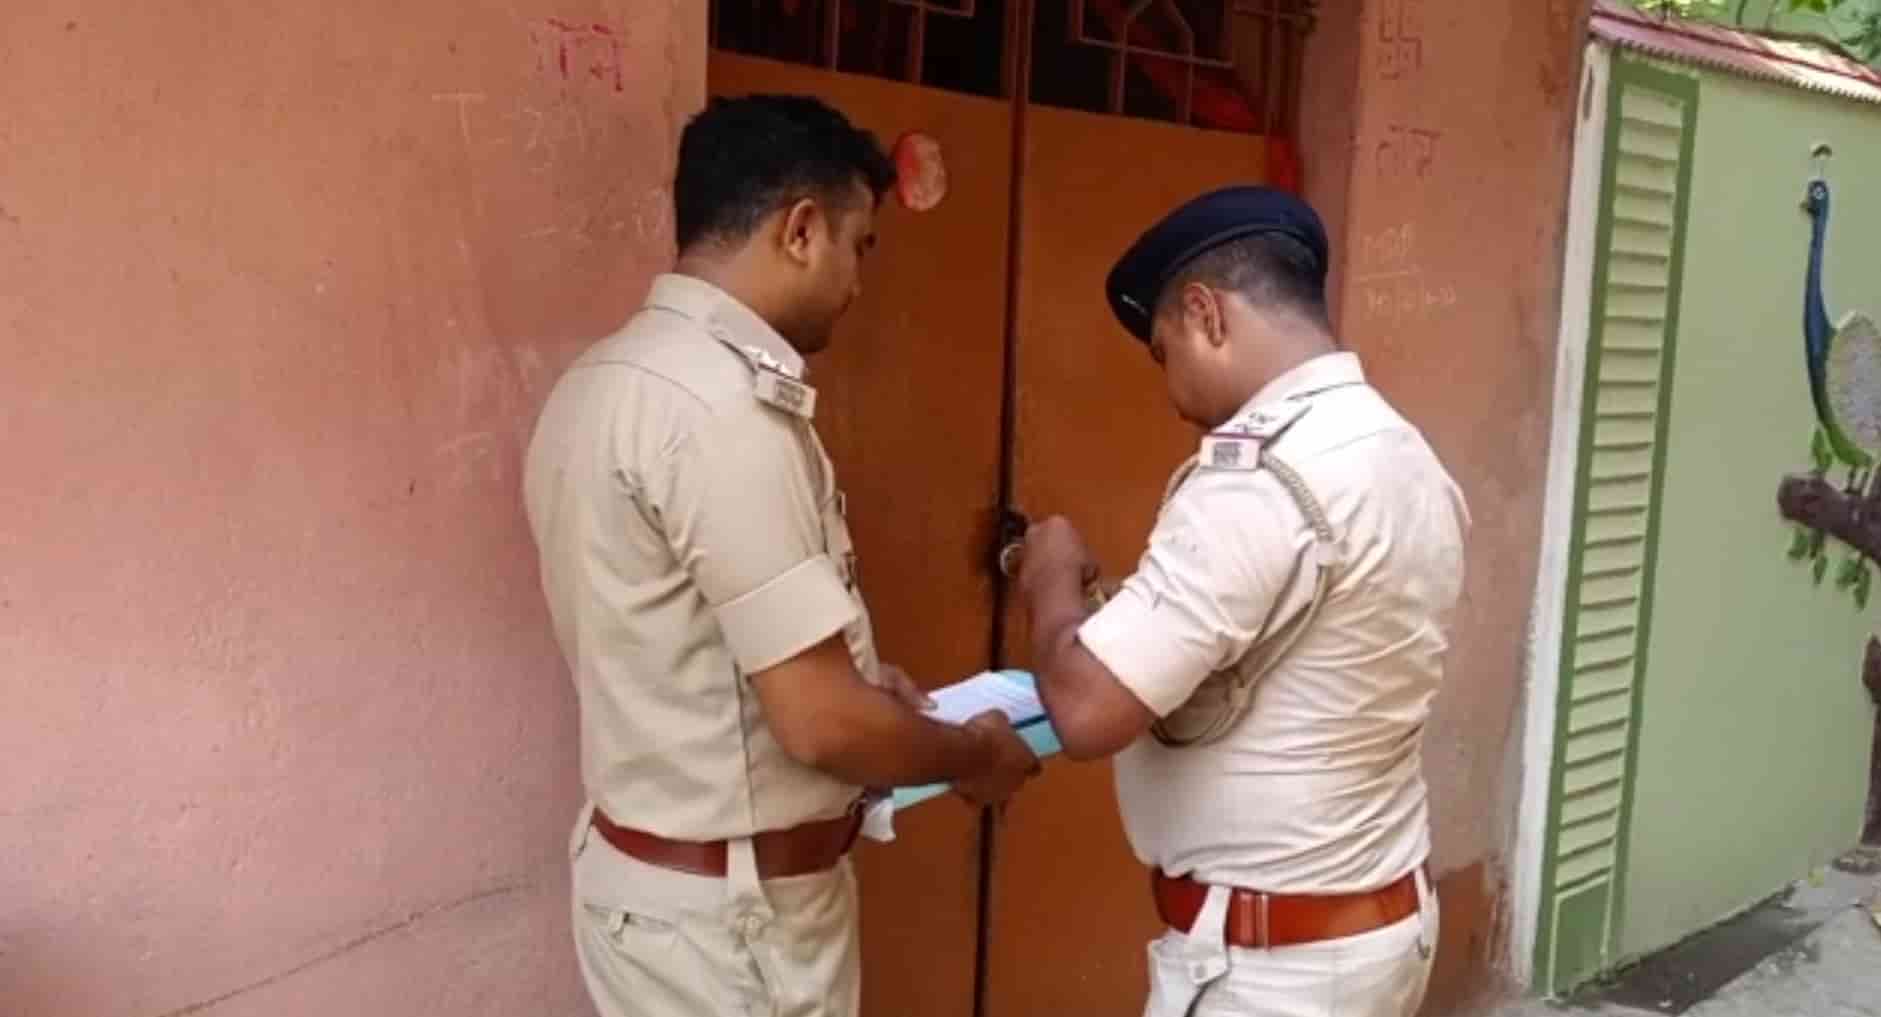 Adverts were pasted at the homes of murder accused Amit Singh and Chirag Mukhi in Sidhgora, Jamshedpur. The suspects, on the run since January, are charged with murdering Chandrashekhar Singh.